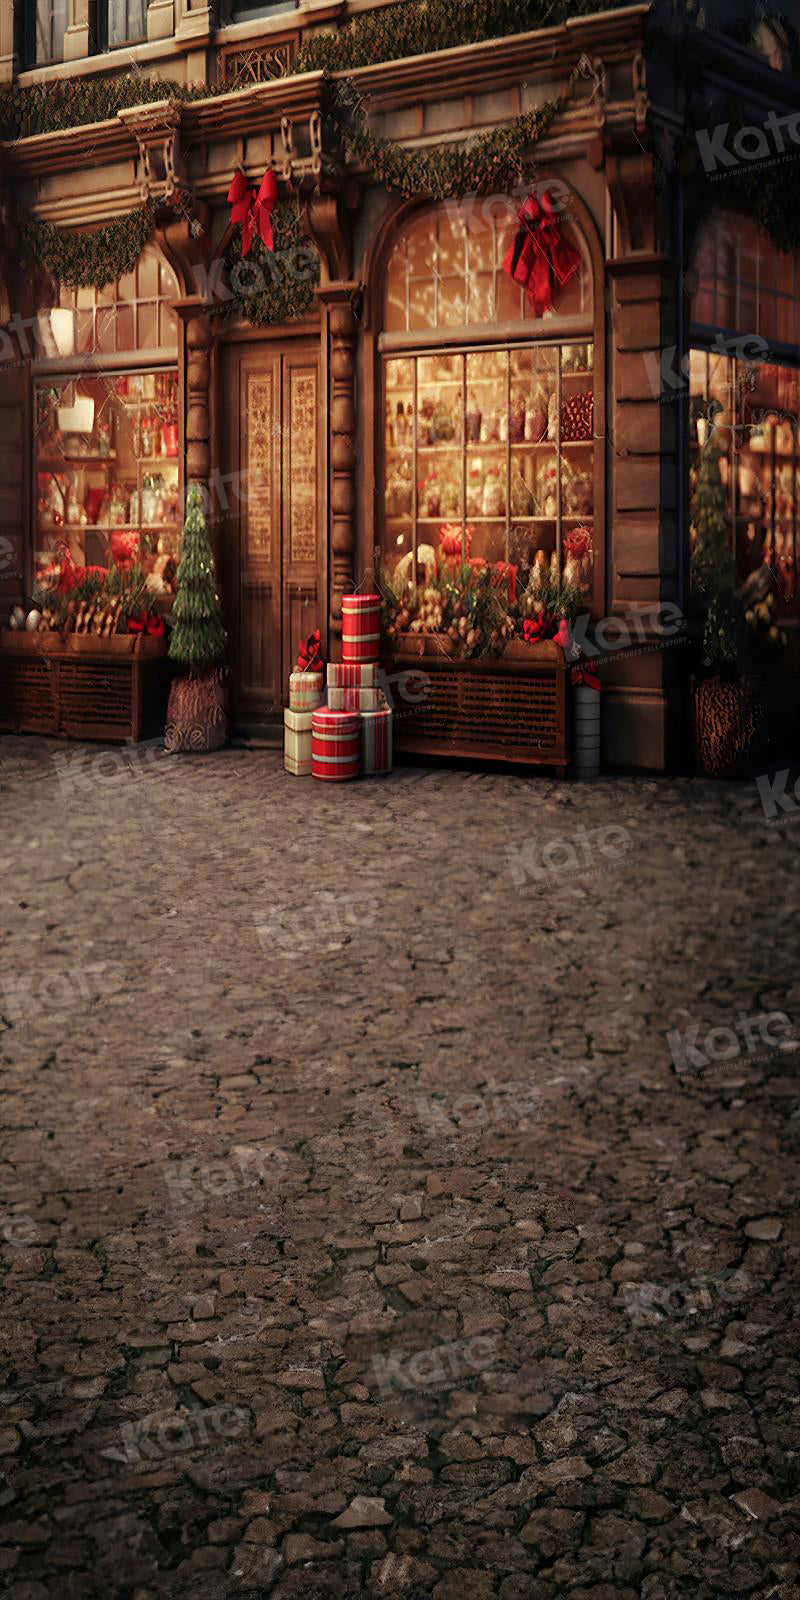 Kate Christmas Street Corner Store Backdrop for Photography